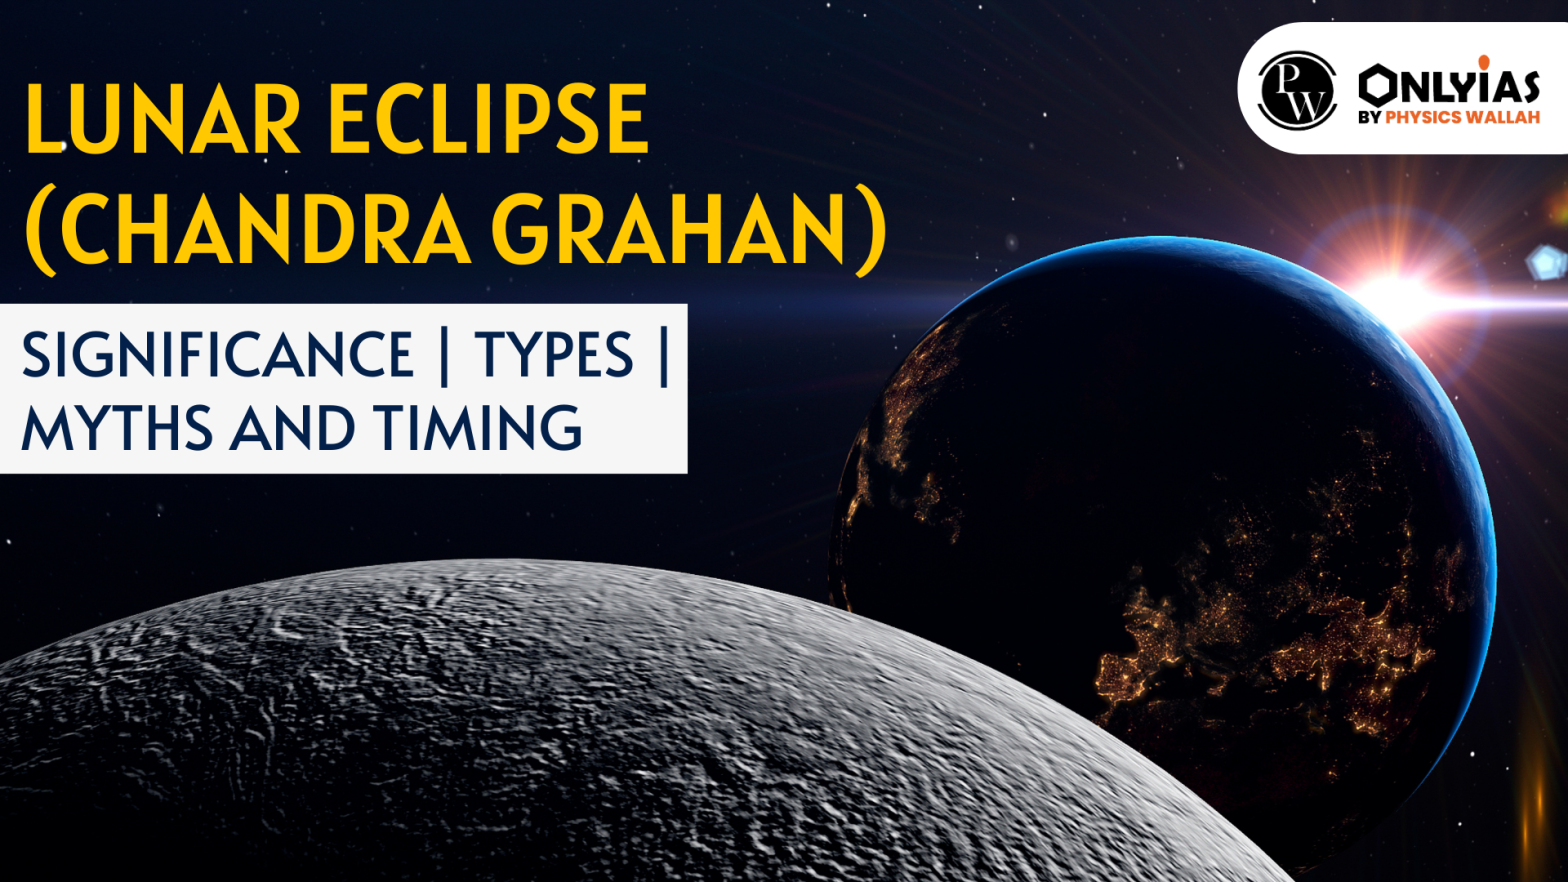 Lunar Eclipse (Chandra Grahan): Significance, Types, Myths and Timing